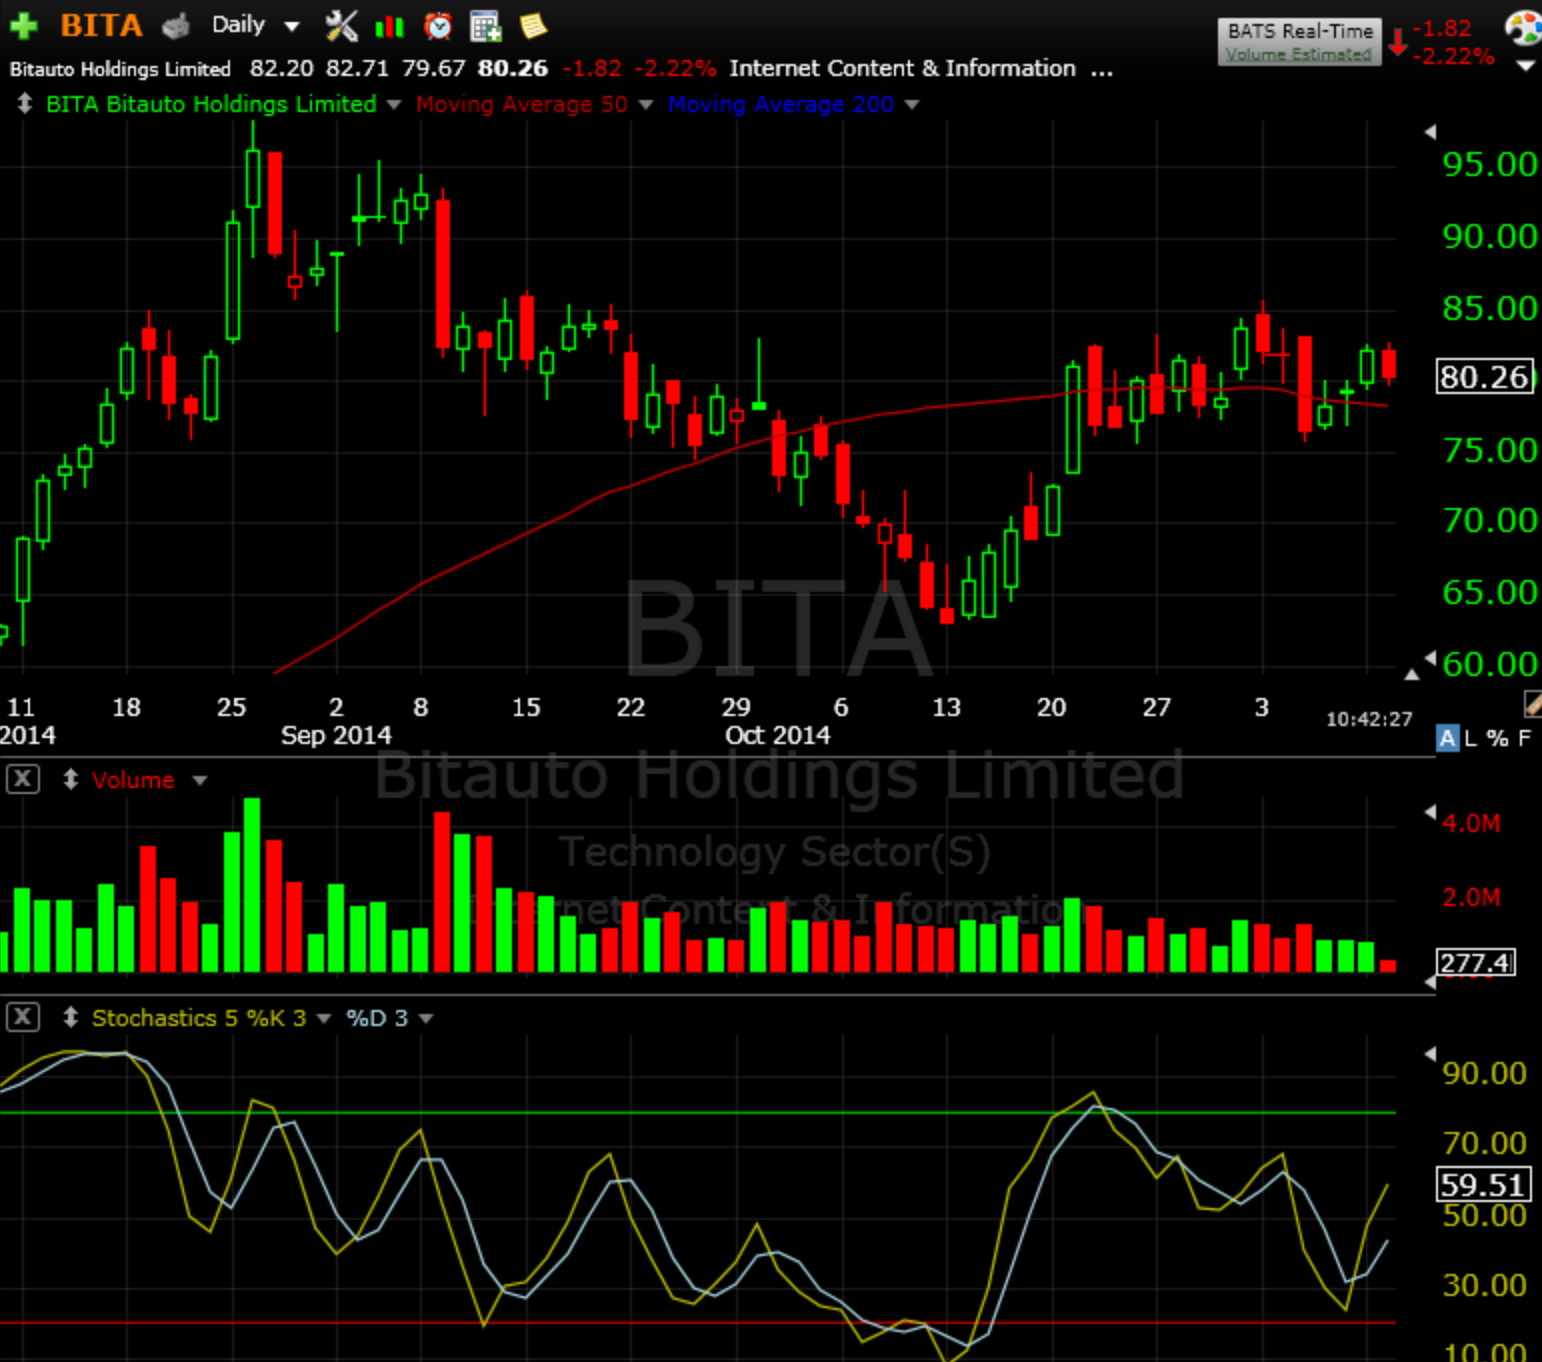 BITA From earlier watch list.Continuation watch over 84.40.